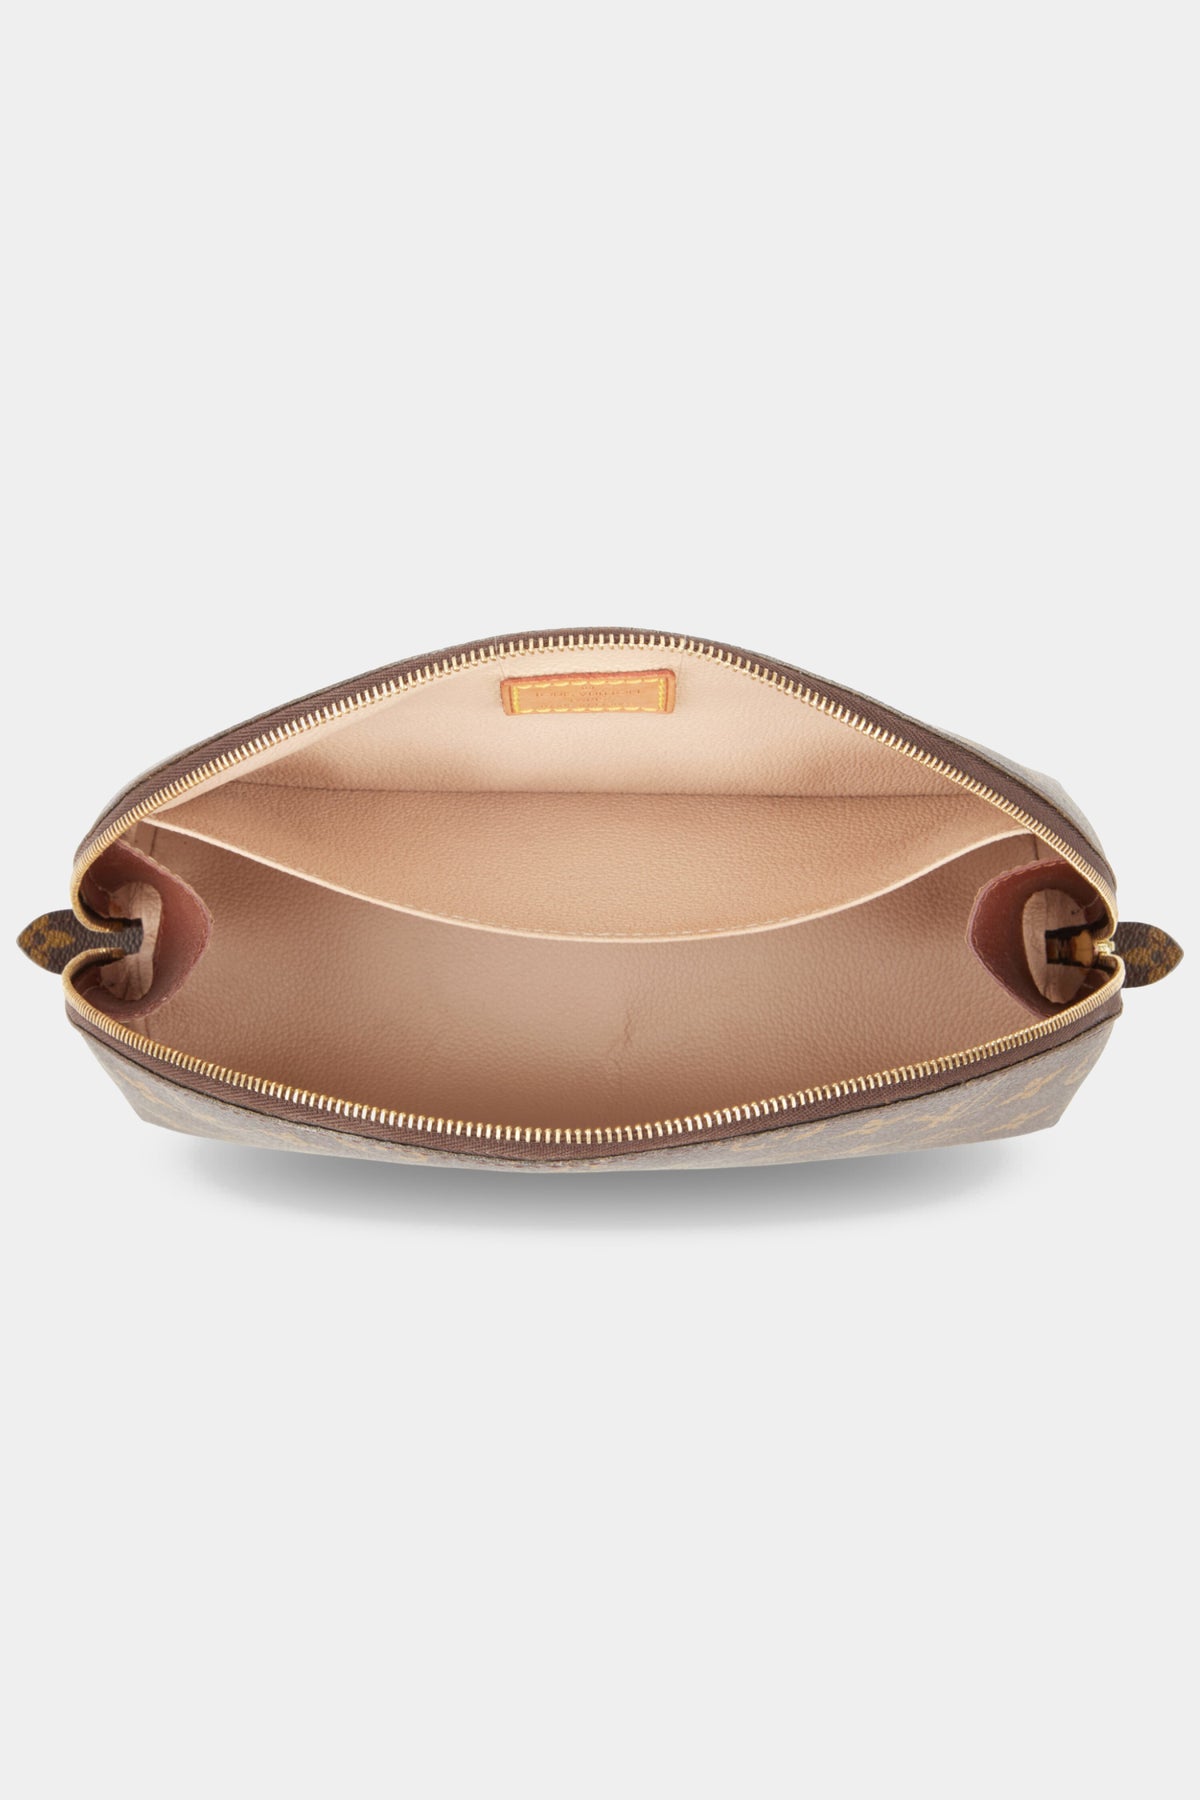 GM Monogram Cosmetic Pouch – Lord & Taylor